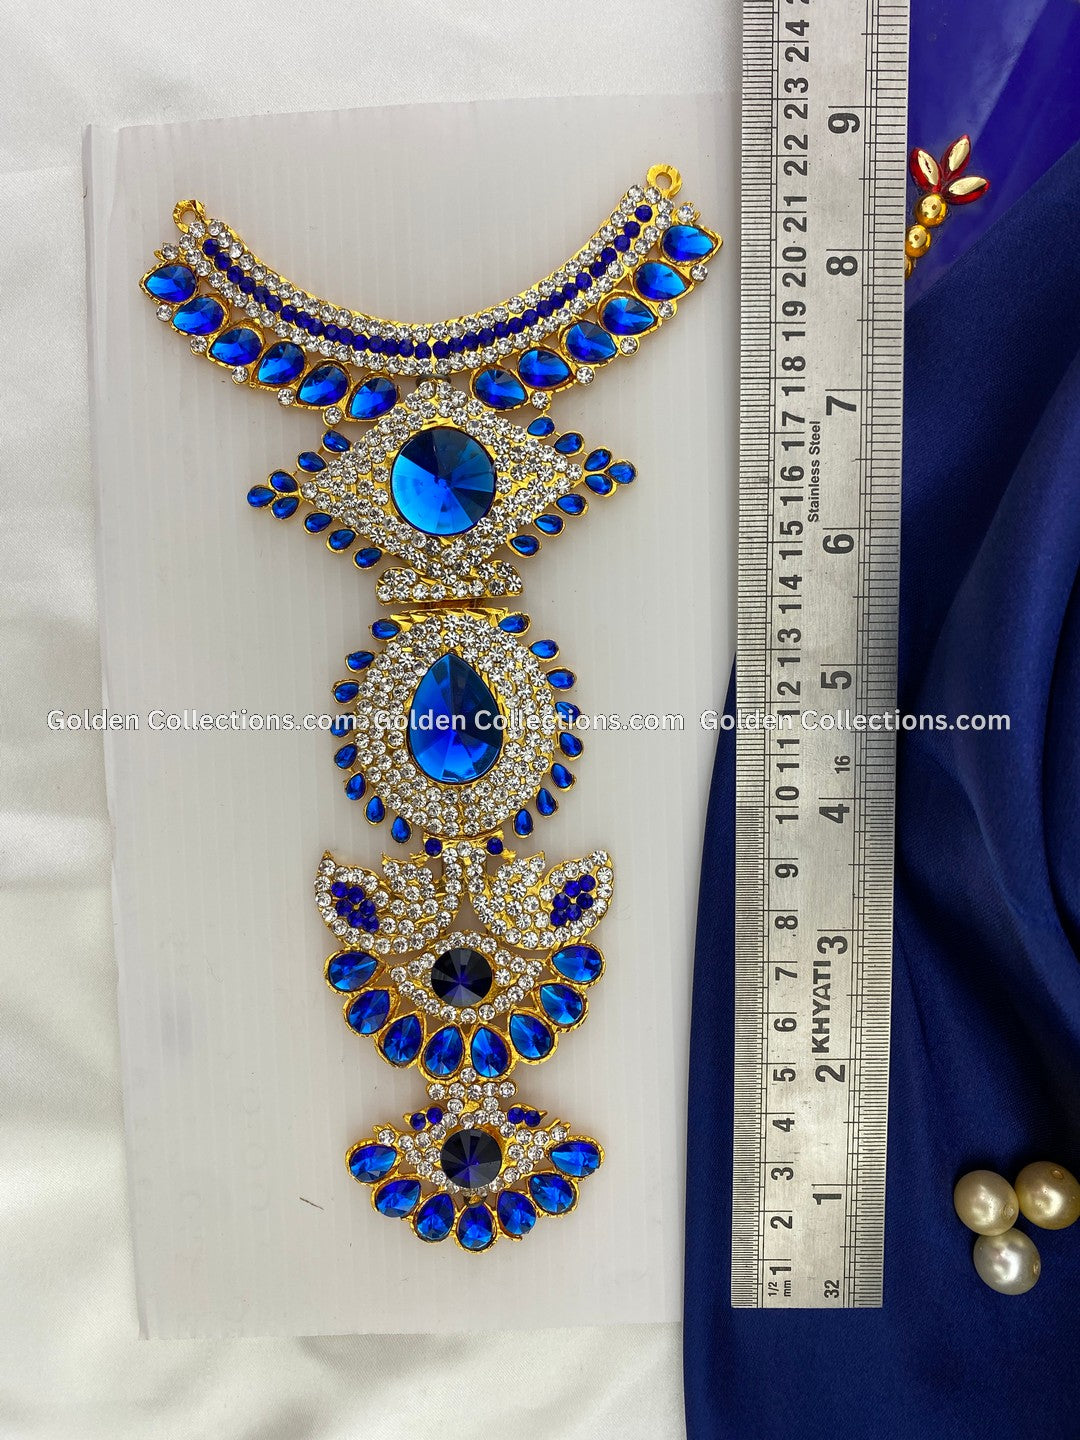 Hindu Deity Jewellery Blue Necklace Golden Collections